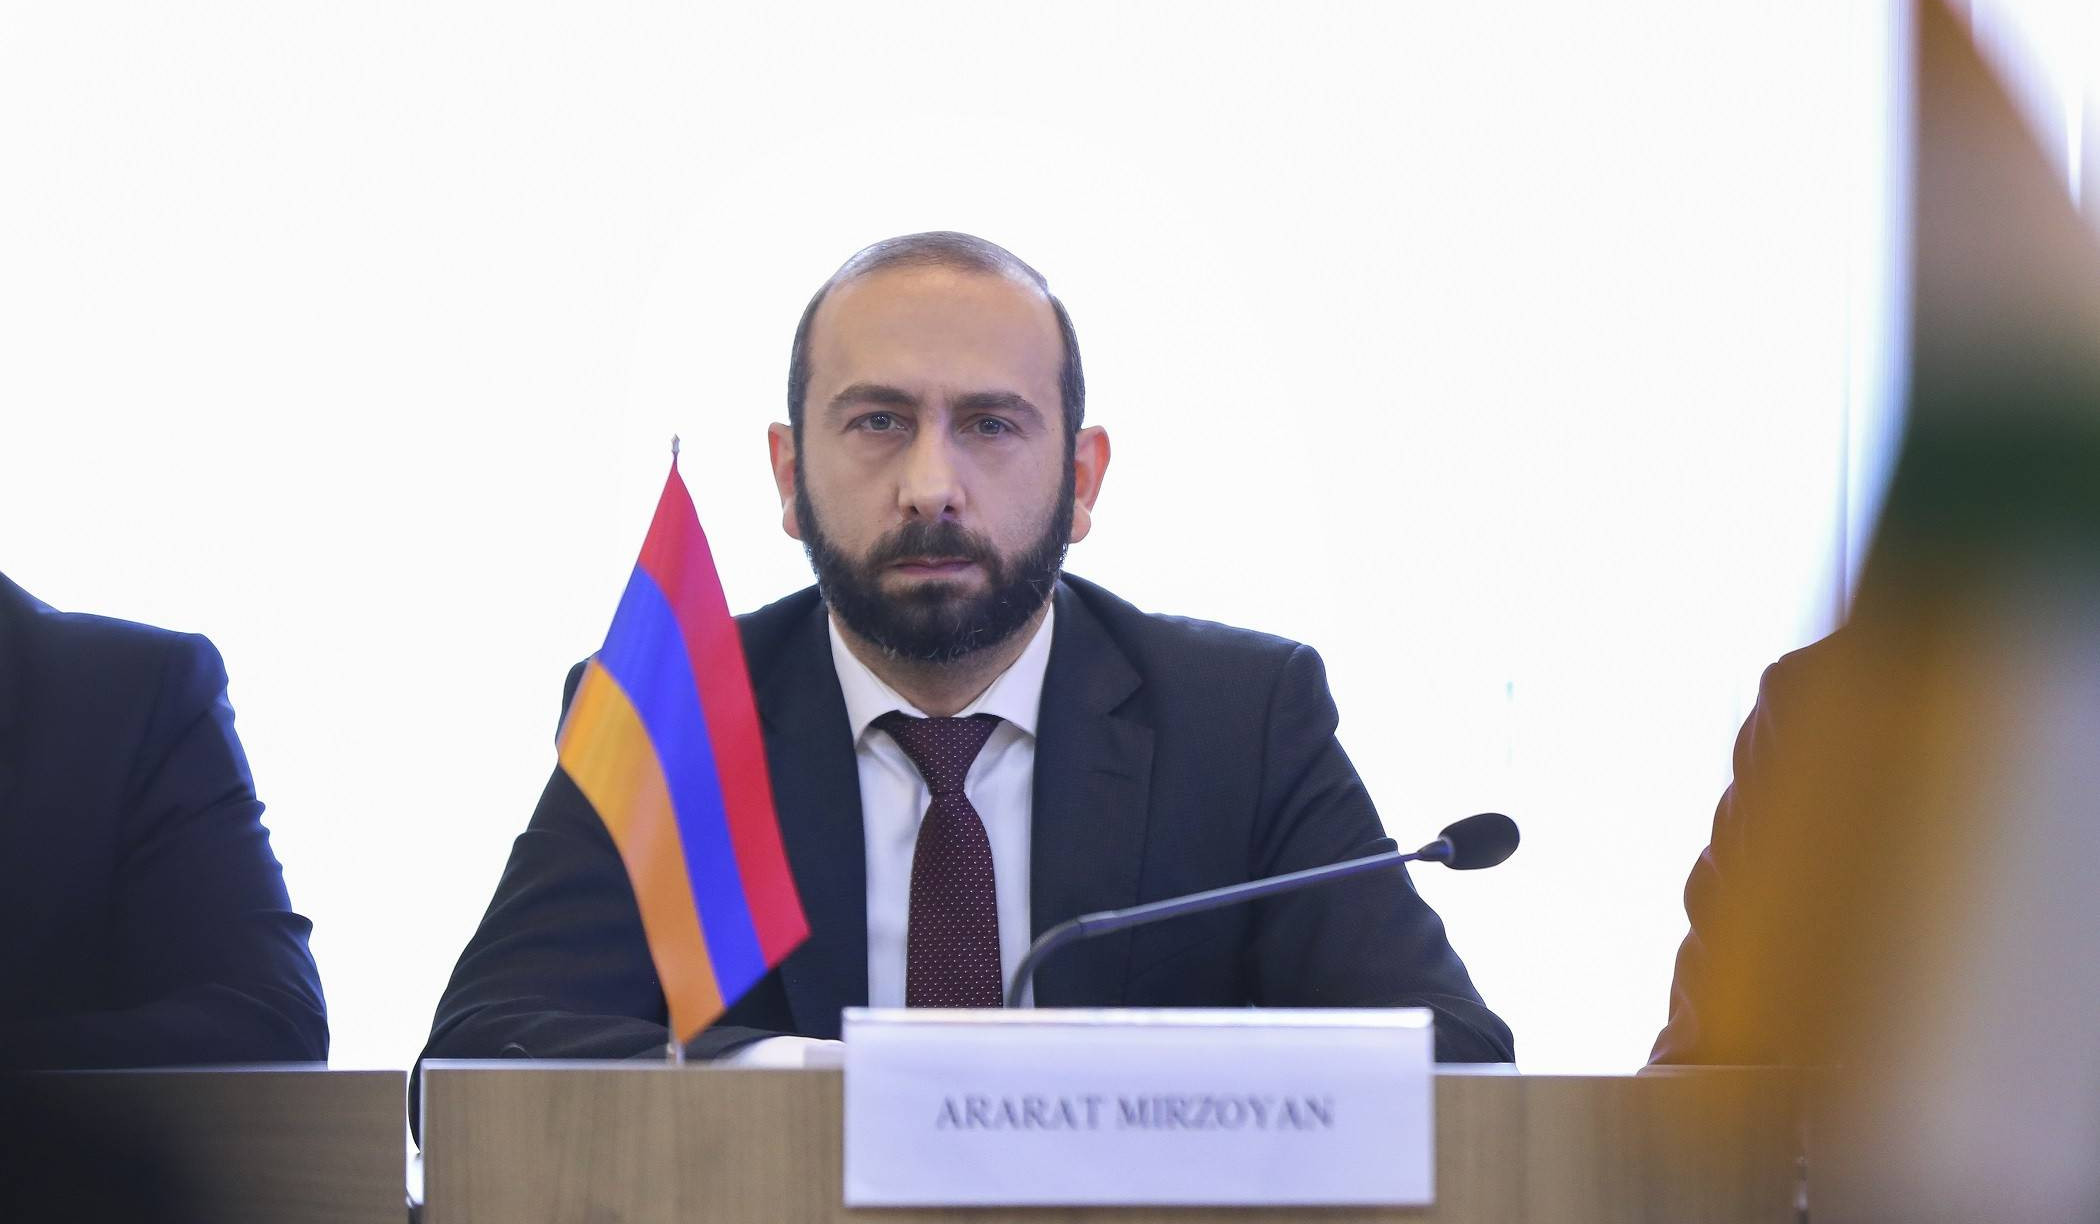 Remarks of Foreign Minister Ararat Mirzoyan during opening ceremony of 8th session of Armenian-Indian Intergovernmental Commission